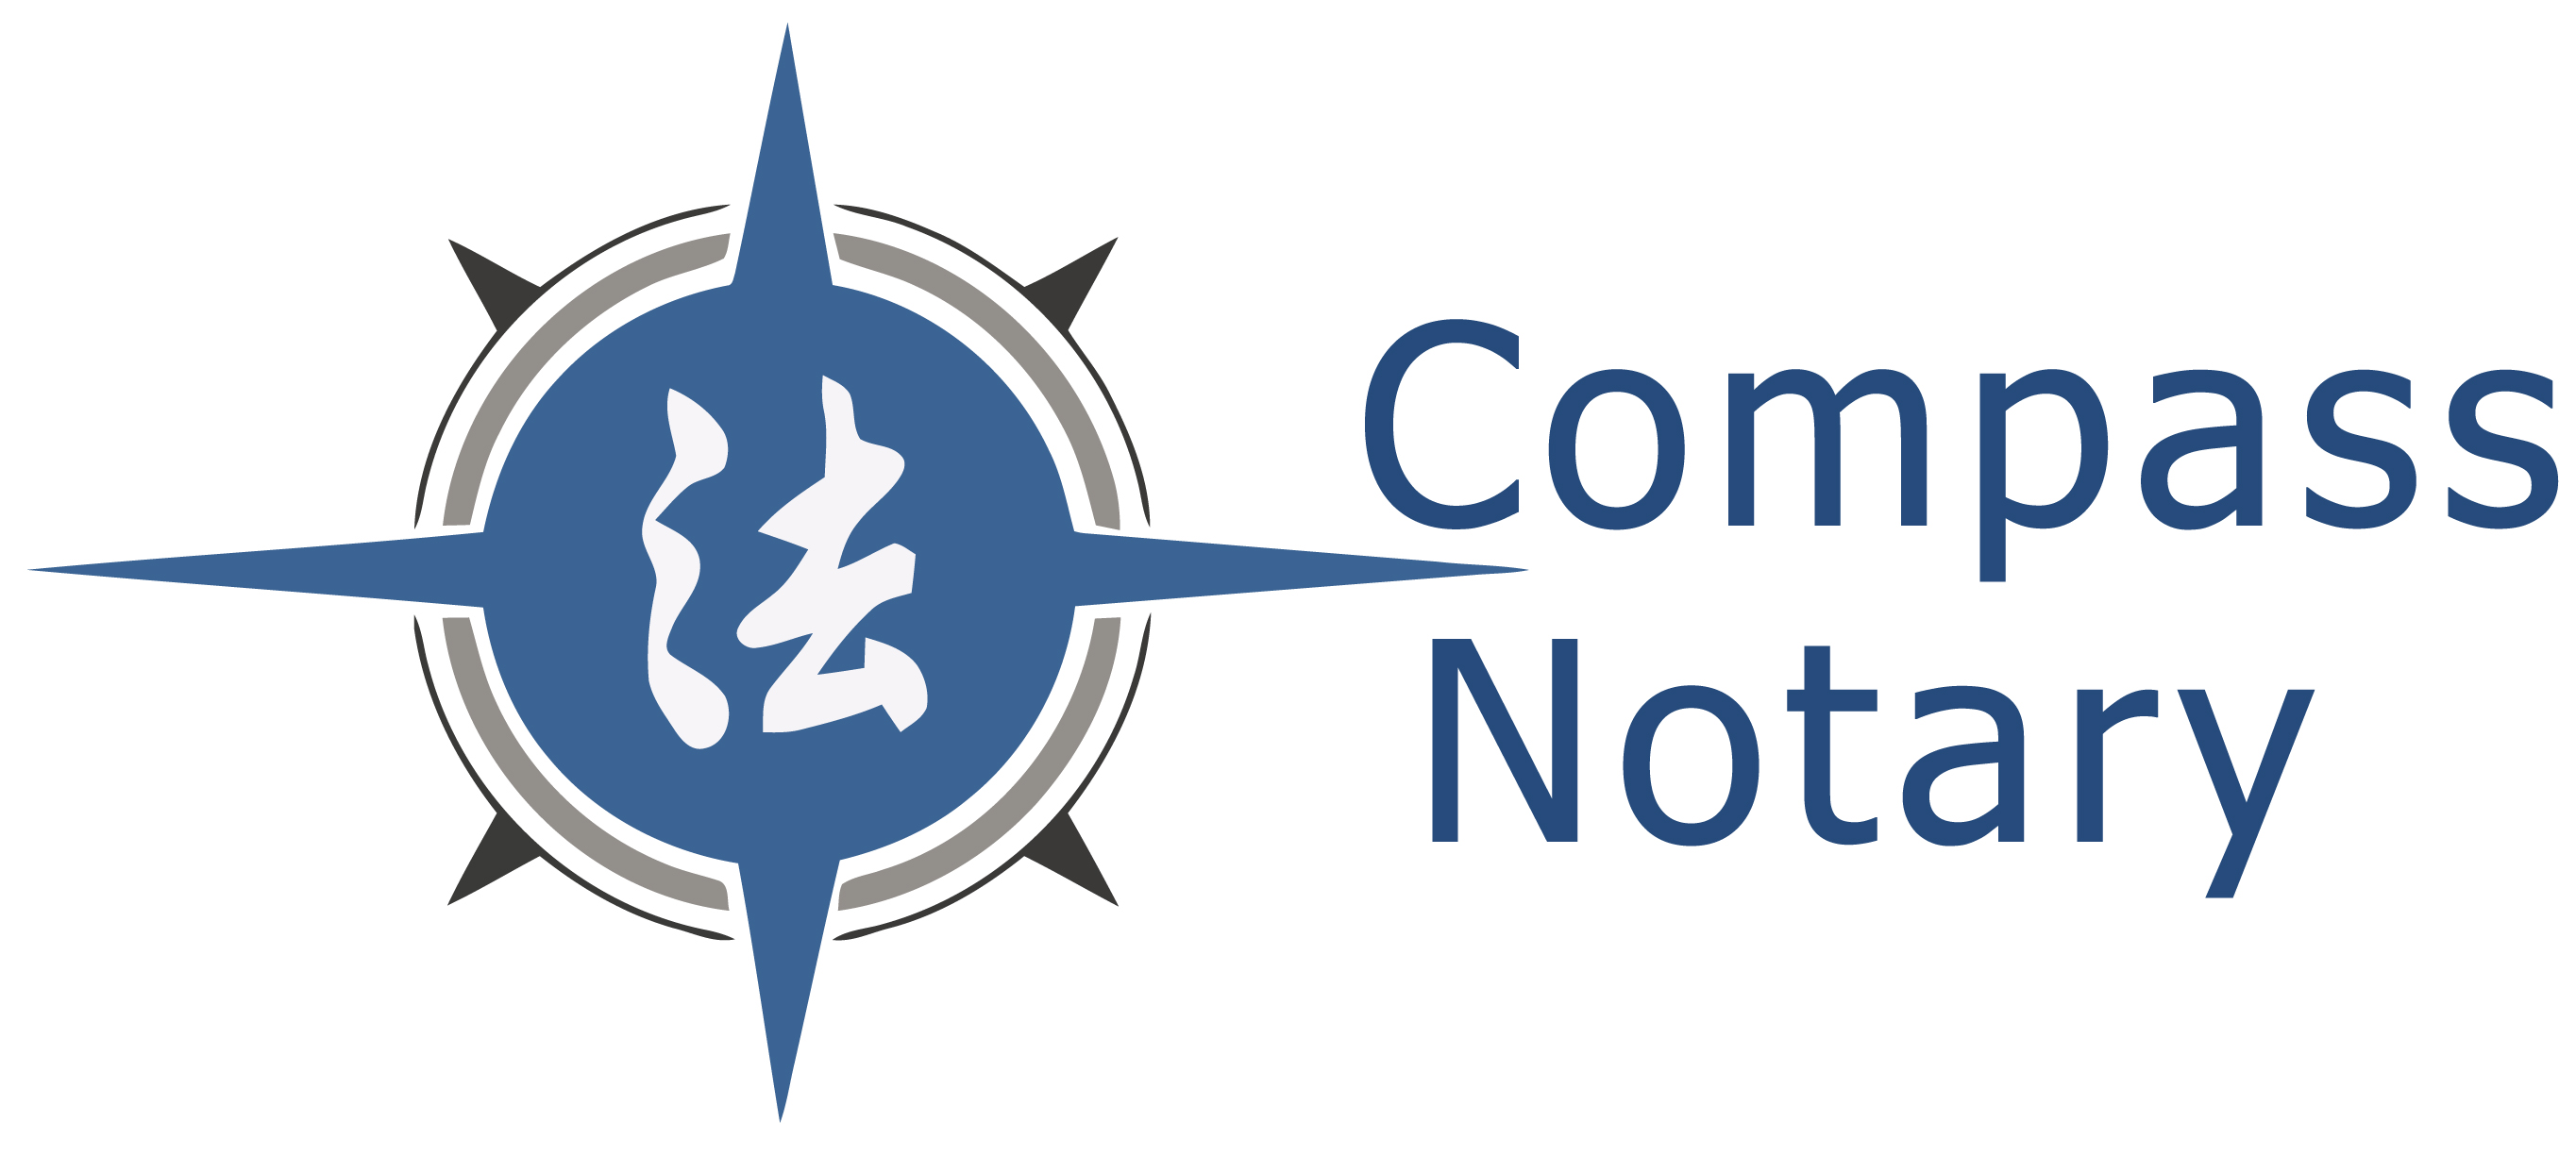 Compass Notary